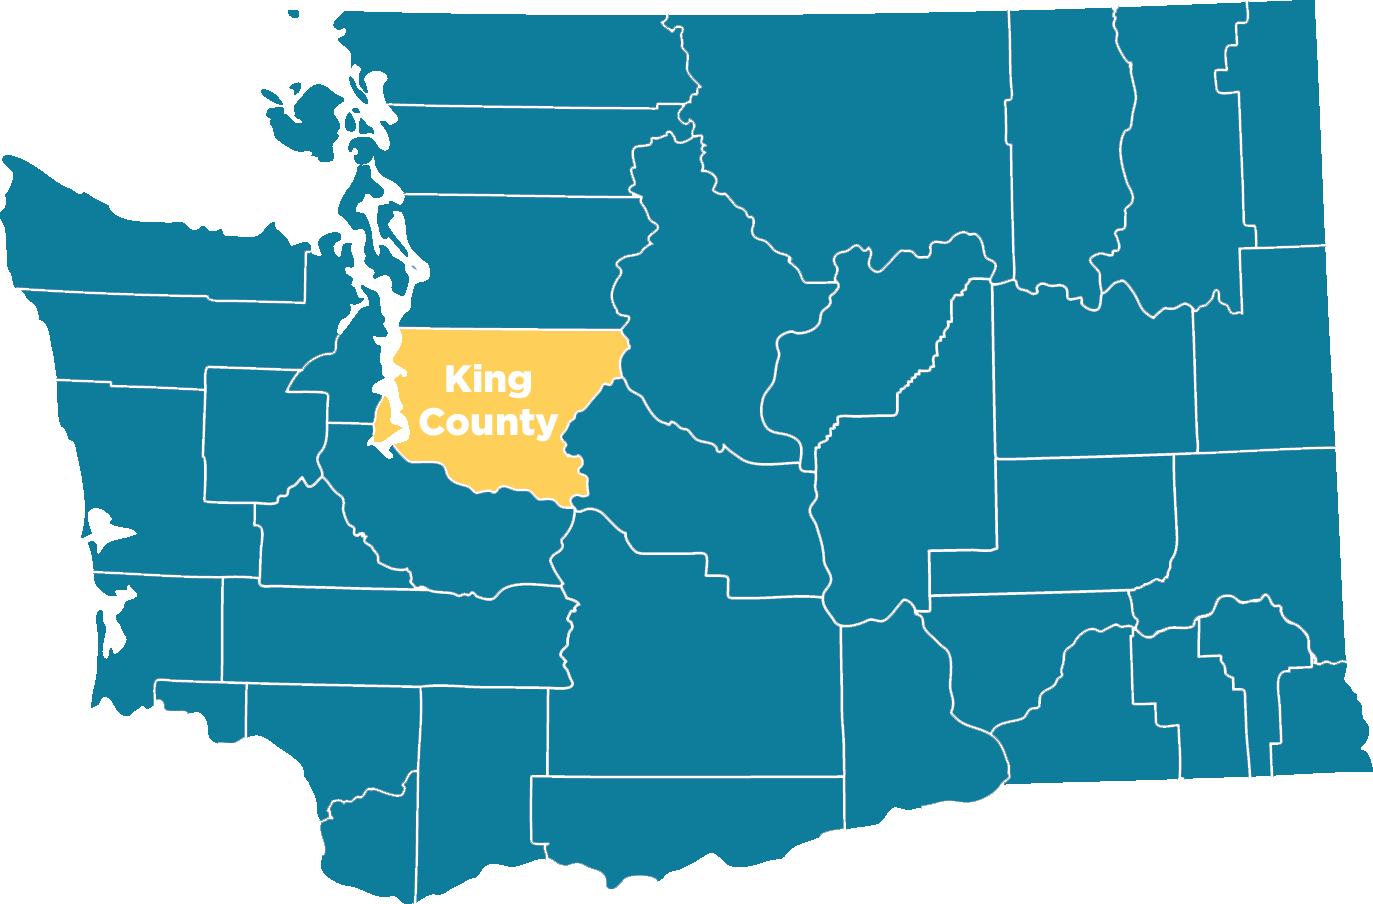 Map of Washington State with King County highlighted